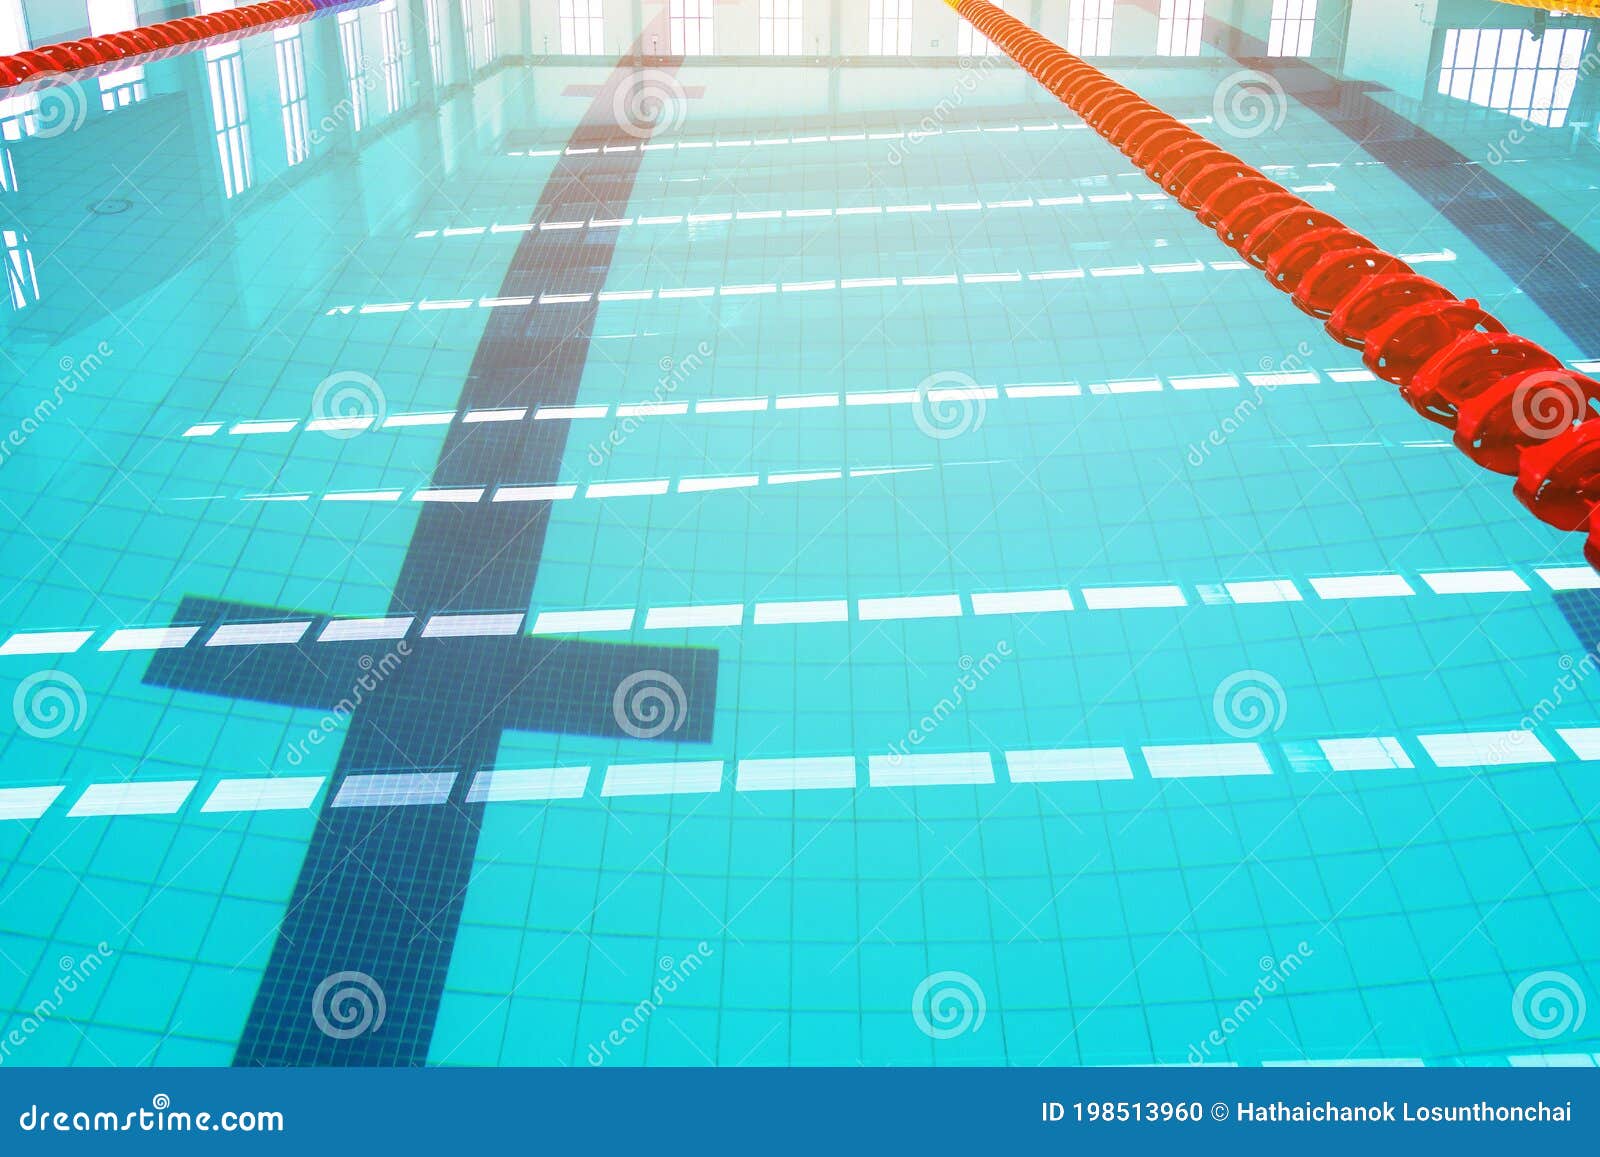 Track And Lanes Of A Competition Swimming Poolindoor Swimming Pool With